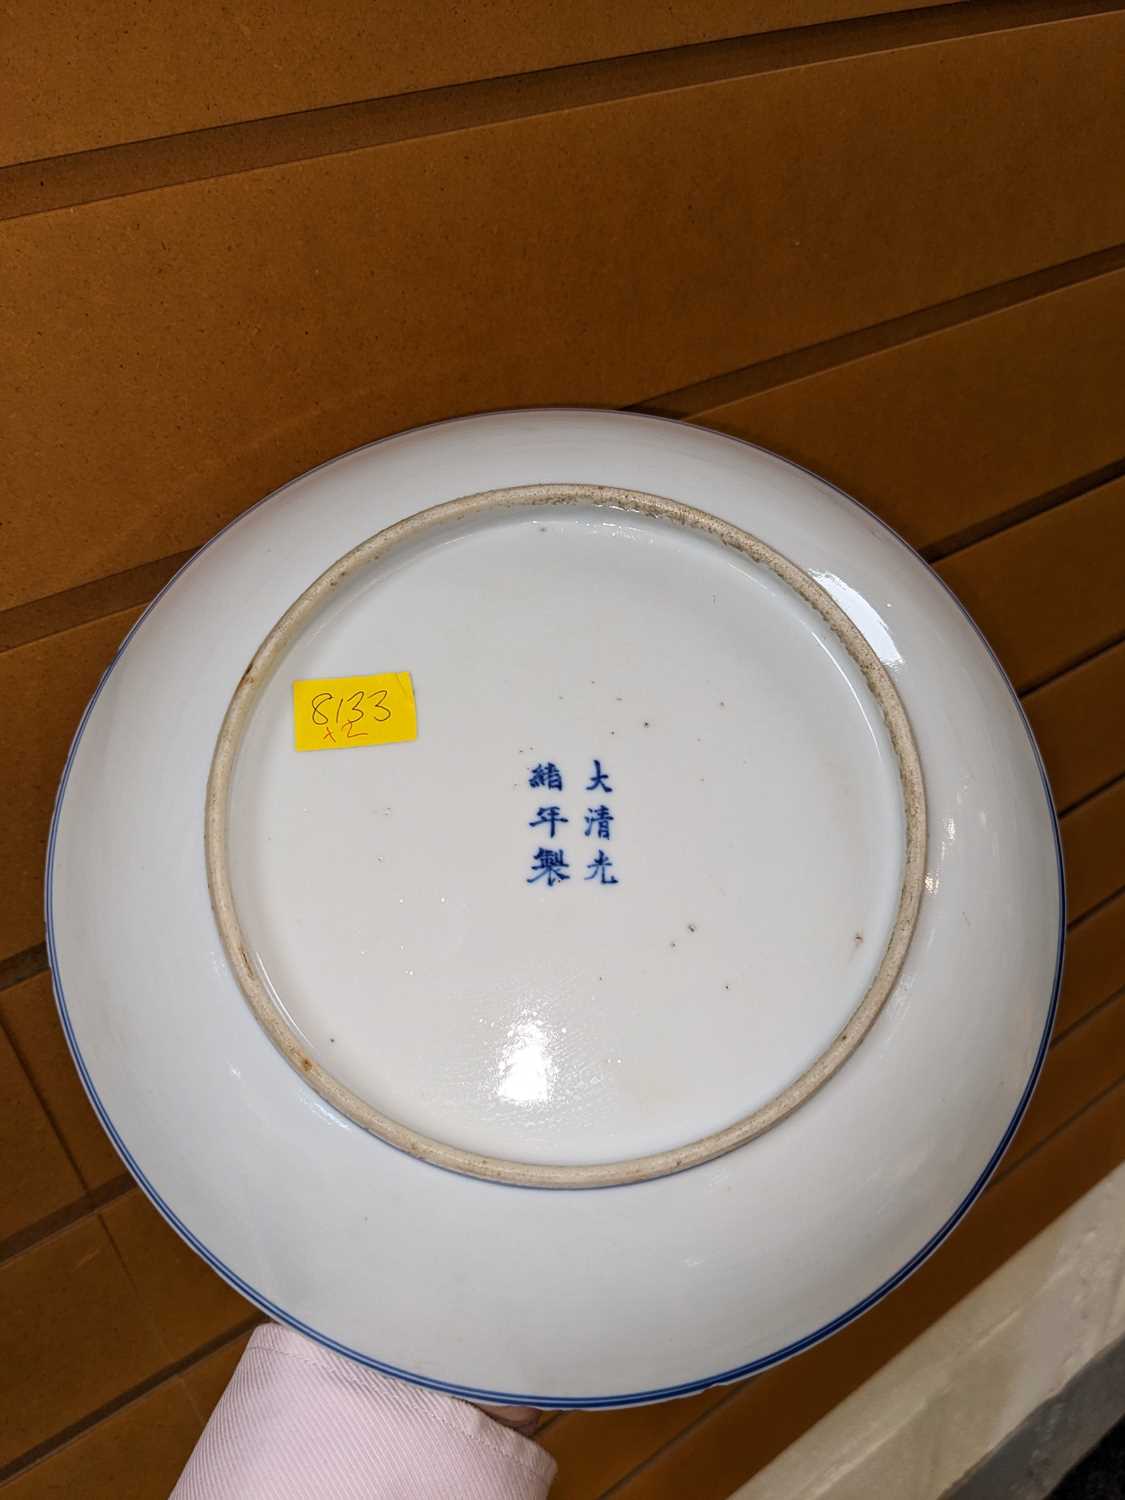 TWO SIMILAR CHINESE BLUE & WHITE 'LOTUS' SAUCER DISHES, painted in the Ming-style, one painted - Image 6 of 7